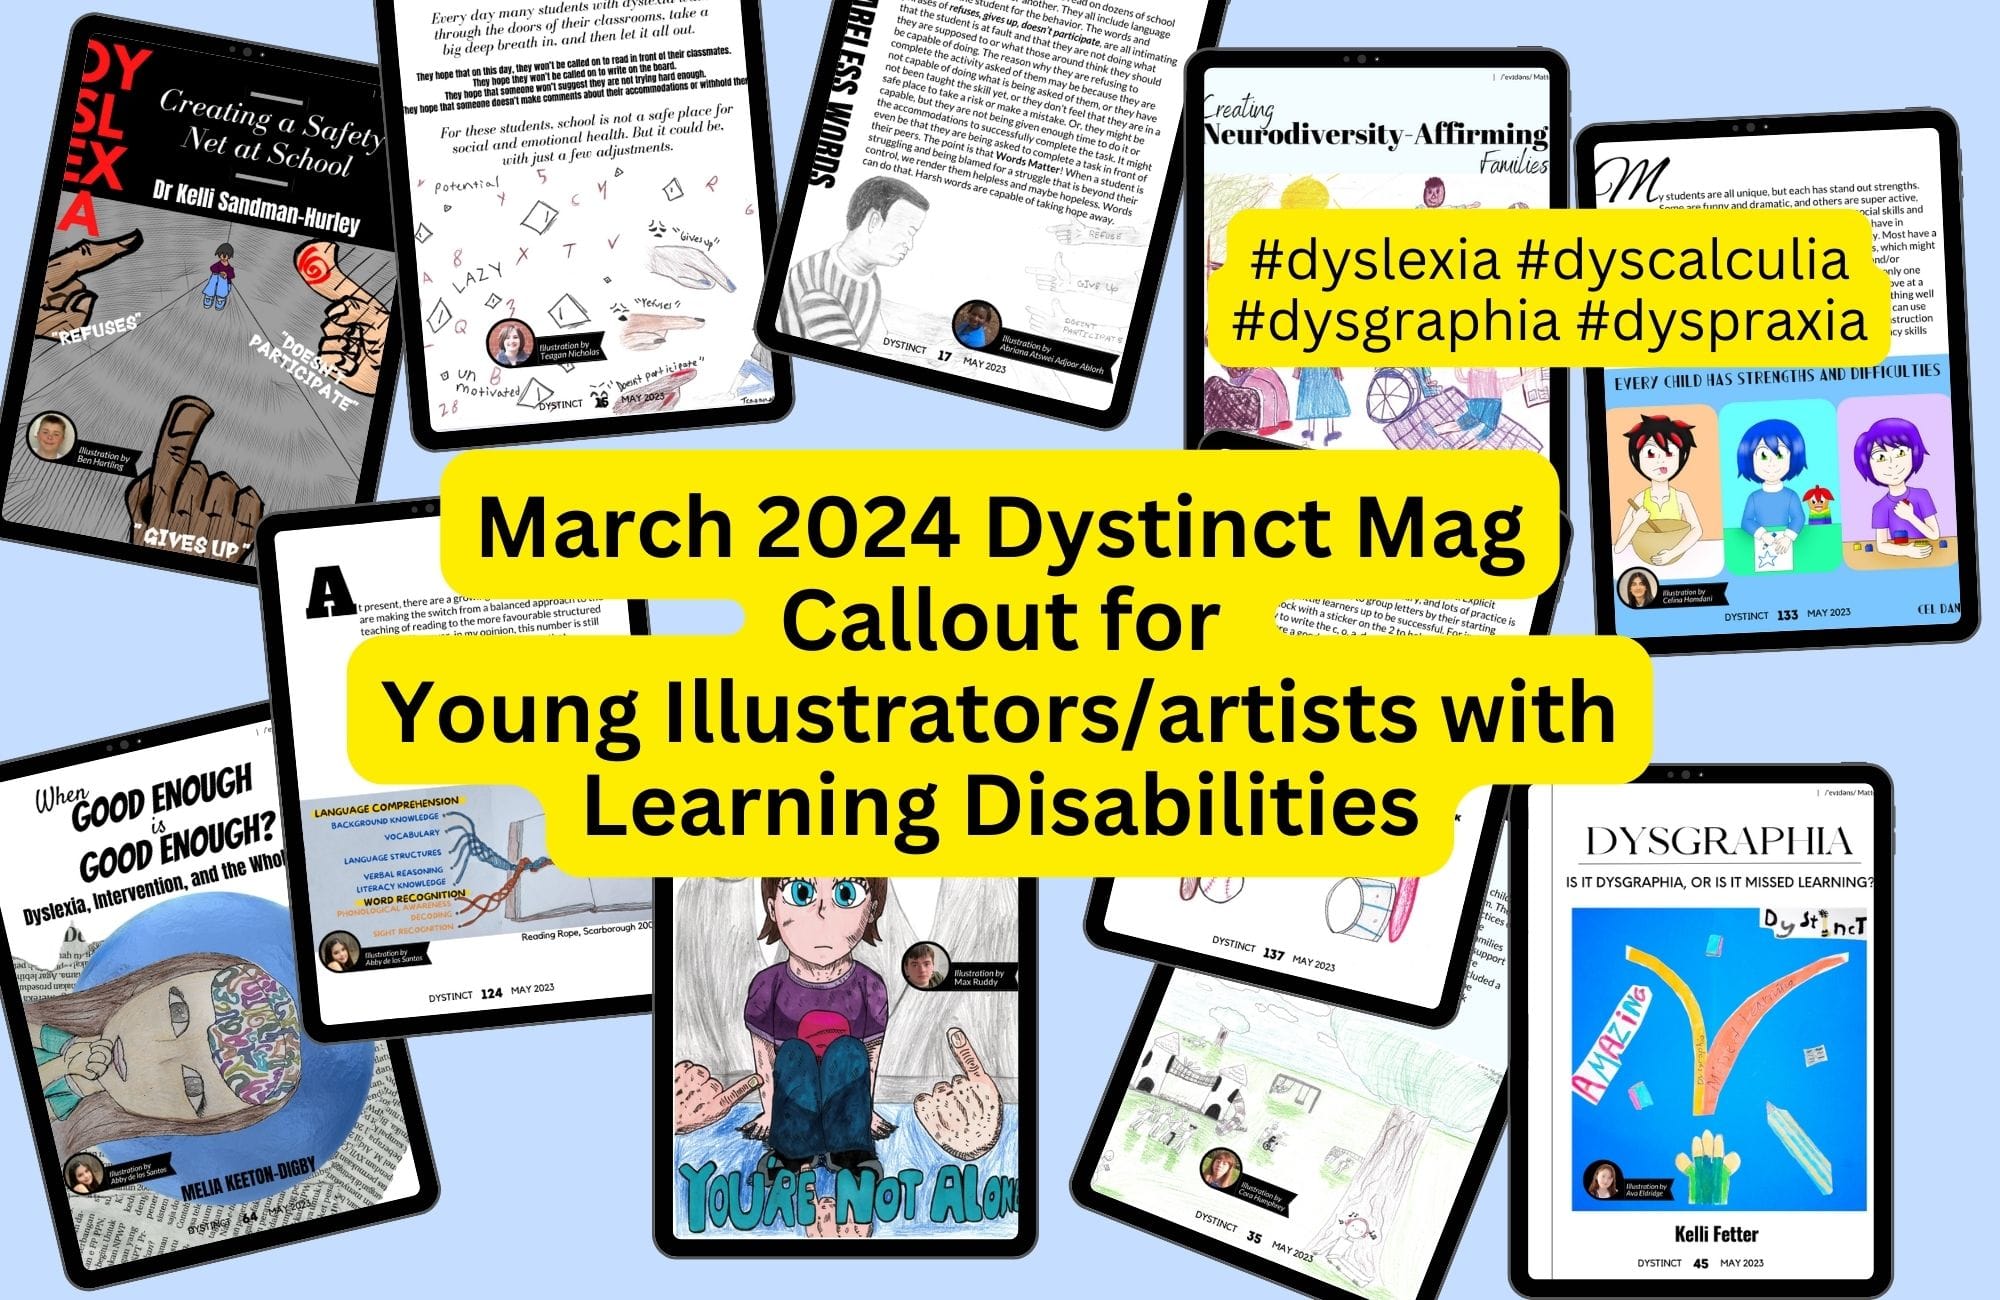 Issue 20: Illustration Callout for March 2024 Dystinct Magazine